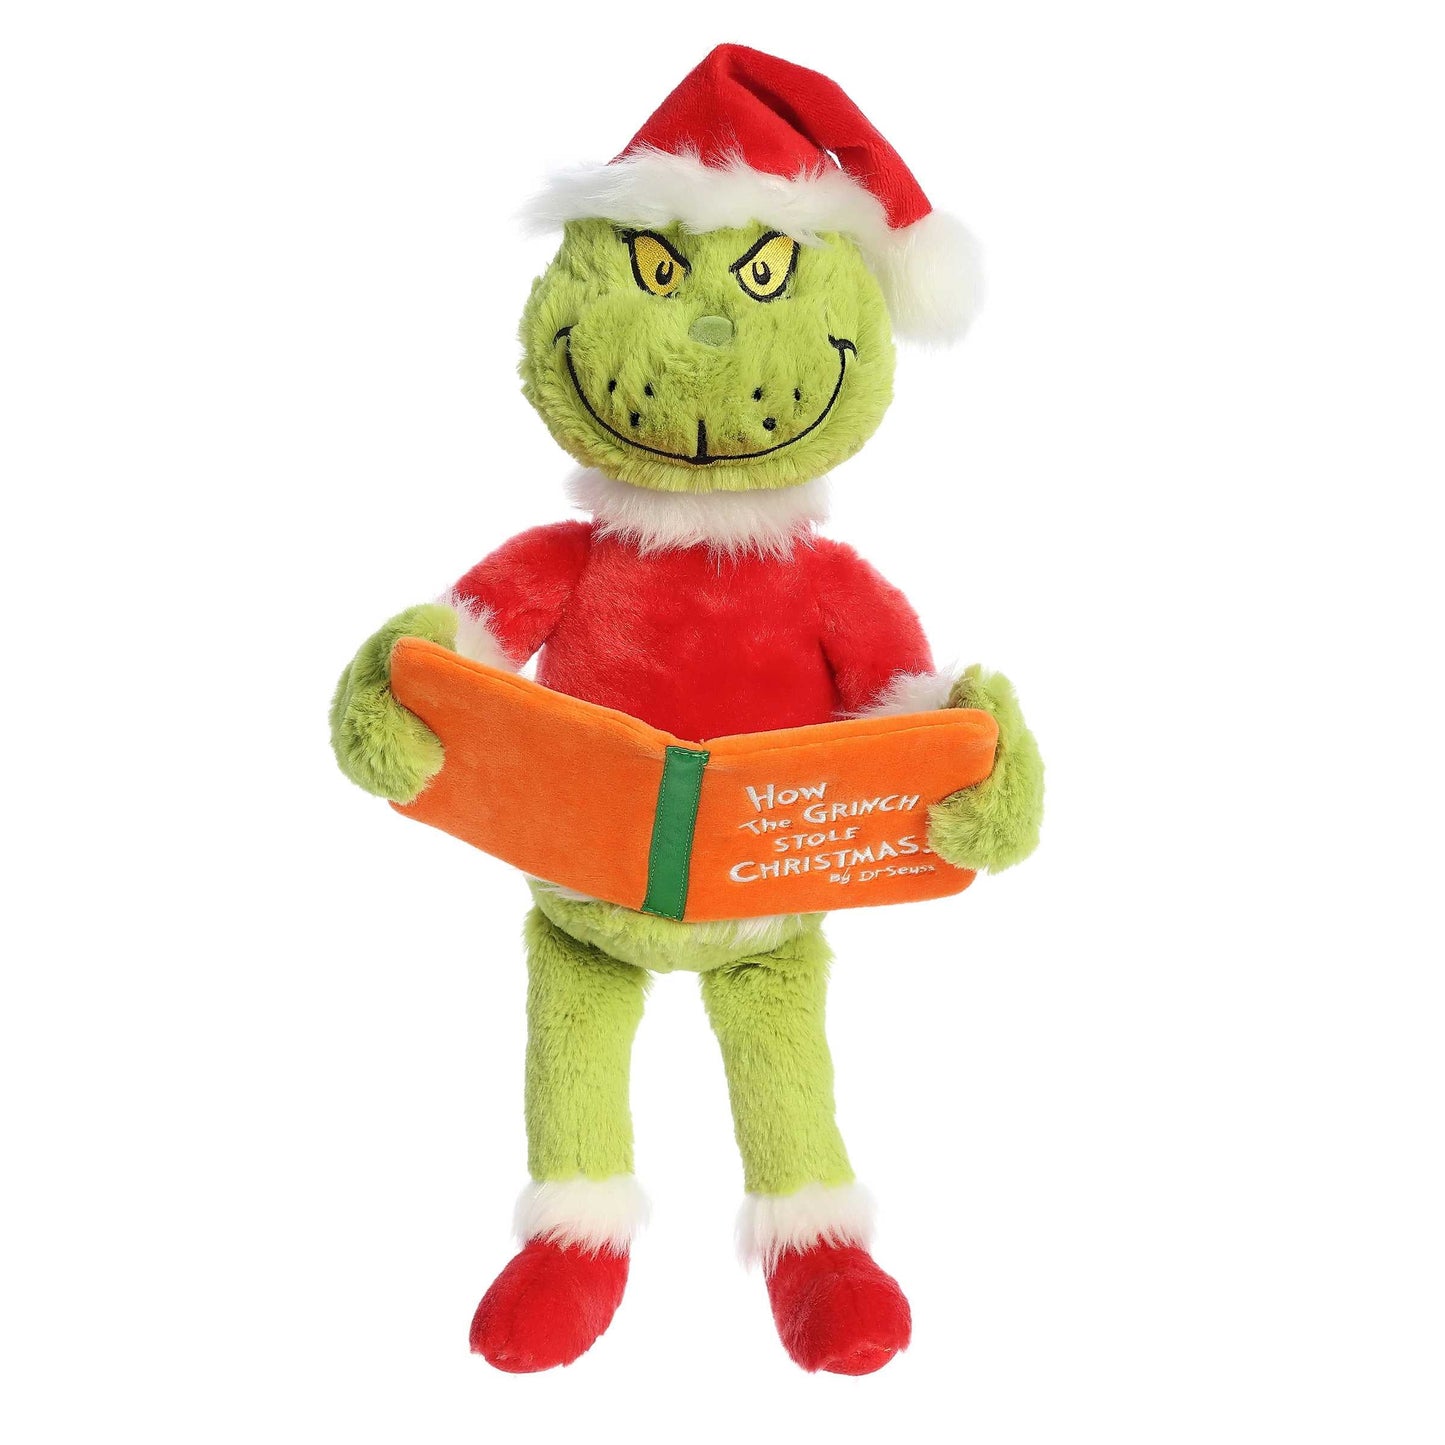 Stuffy - The Grinch Storytime - 16"